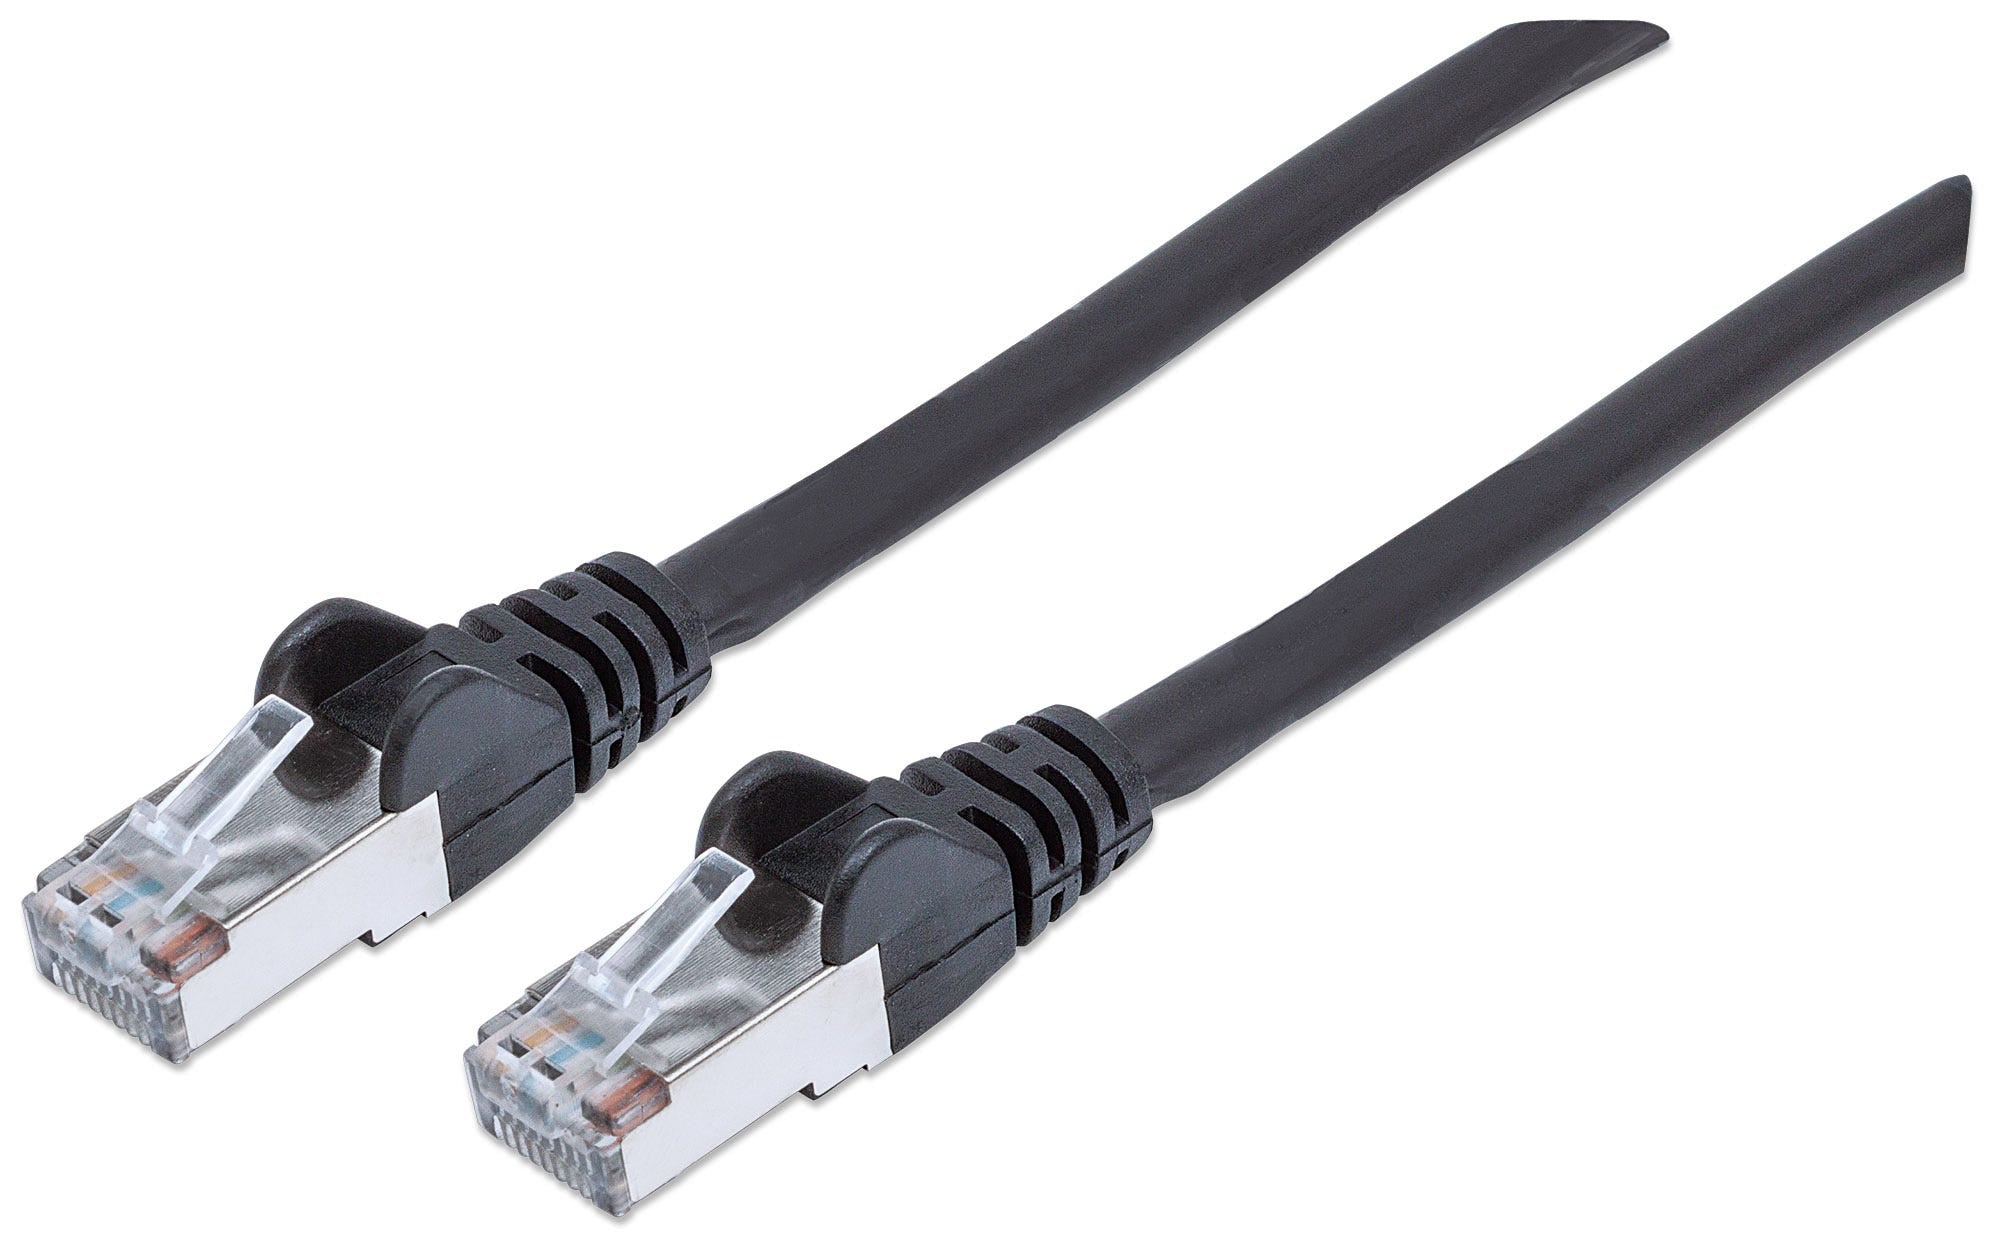 Intellinet Network Patch Cable, Cat6, 30m, Black, Copper, S/FTP, LSOH / LSZH, PVC, RJ45, Gold Plated Contacts, Snagless, Booted, Lifetime Warranty, Polybag